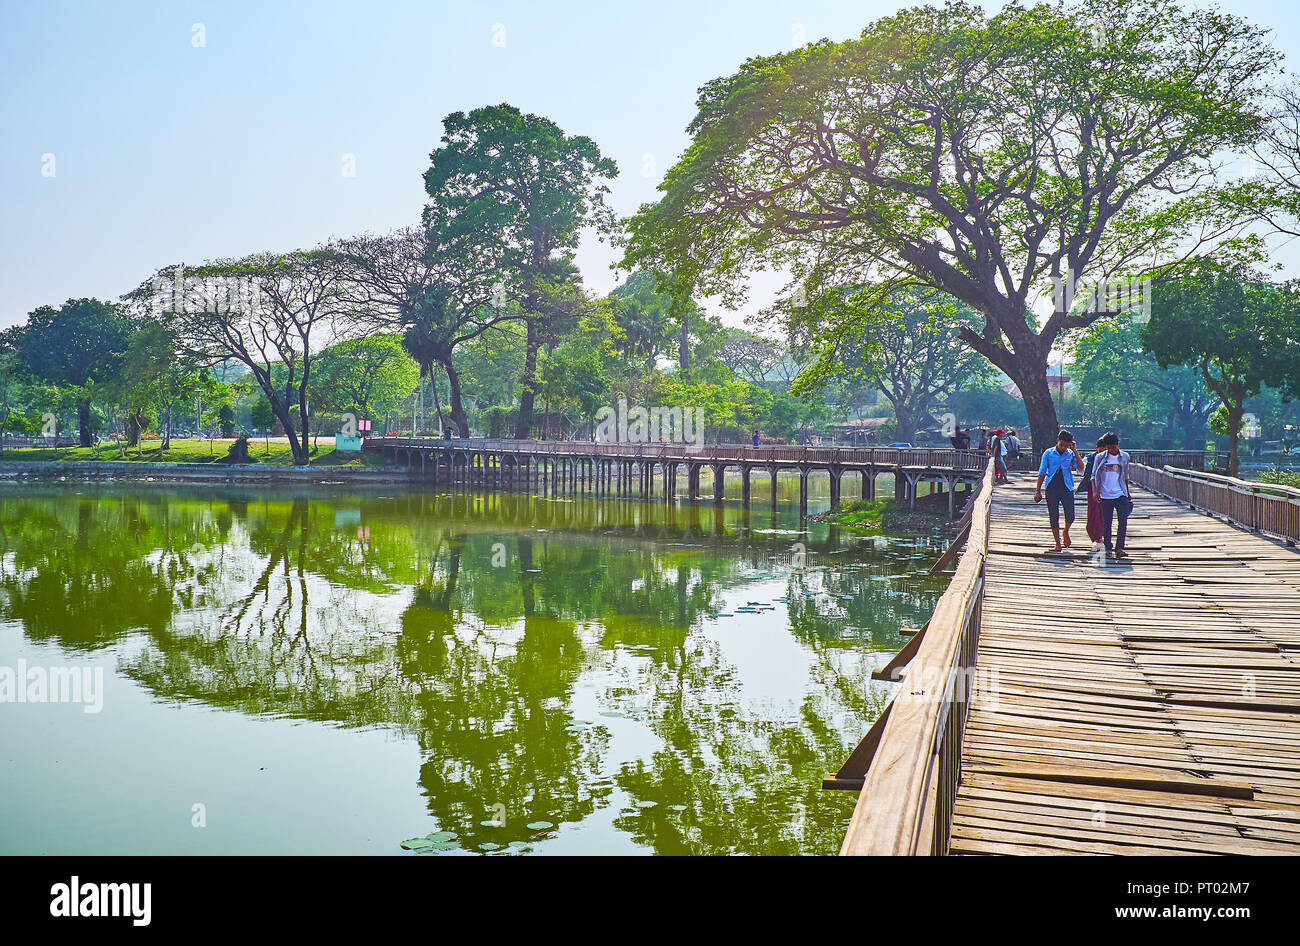 YANGON, MYANMAR - FEBRUARY 27, 2018: The wobbly creaking timber bridge across the lake is the local attraction of Kandawgyi park, on February 27 in Ya Stock Photo